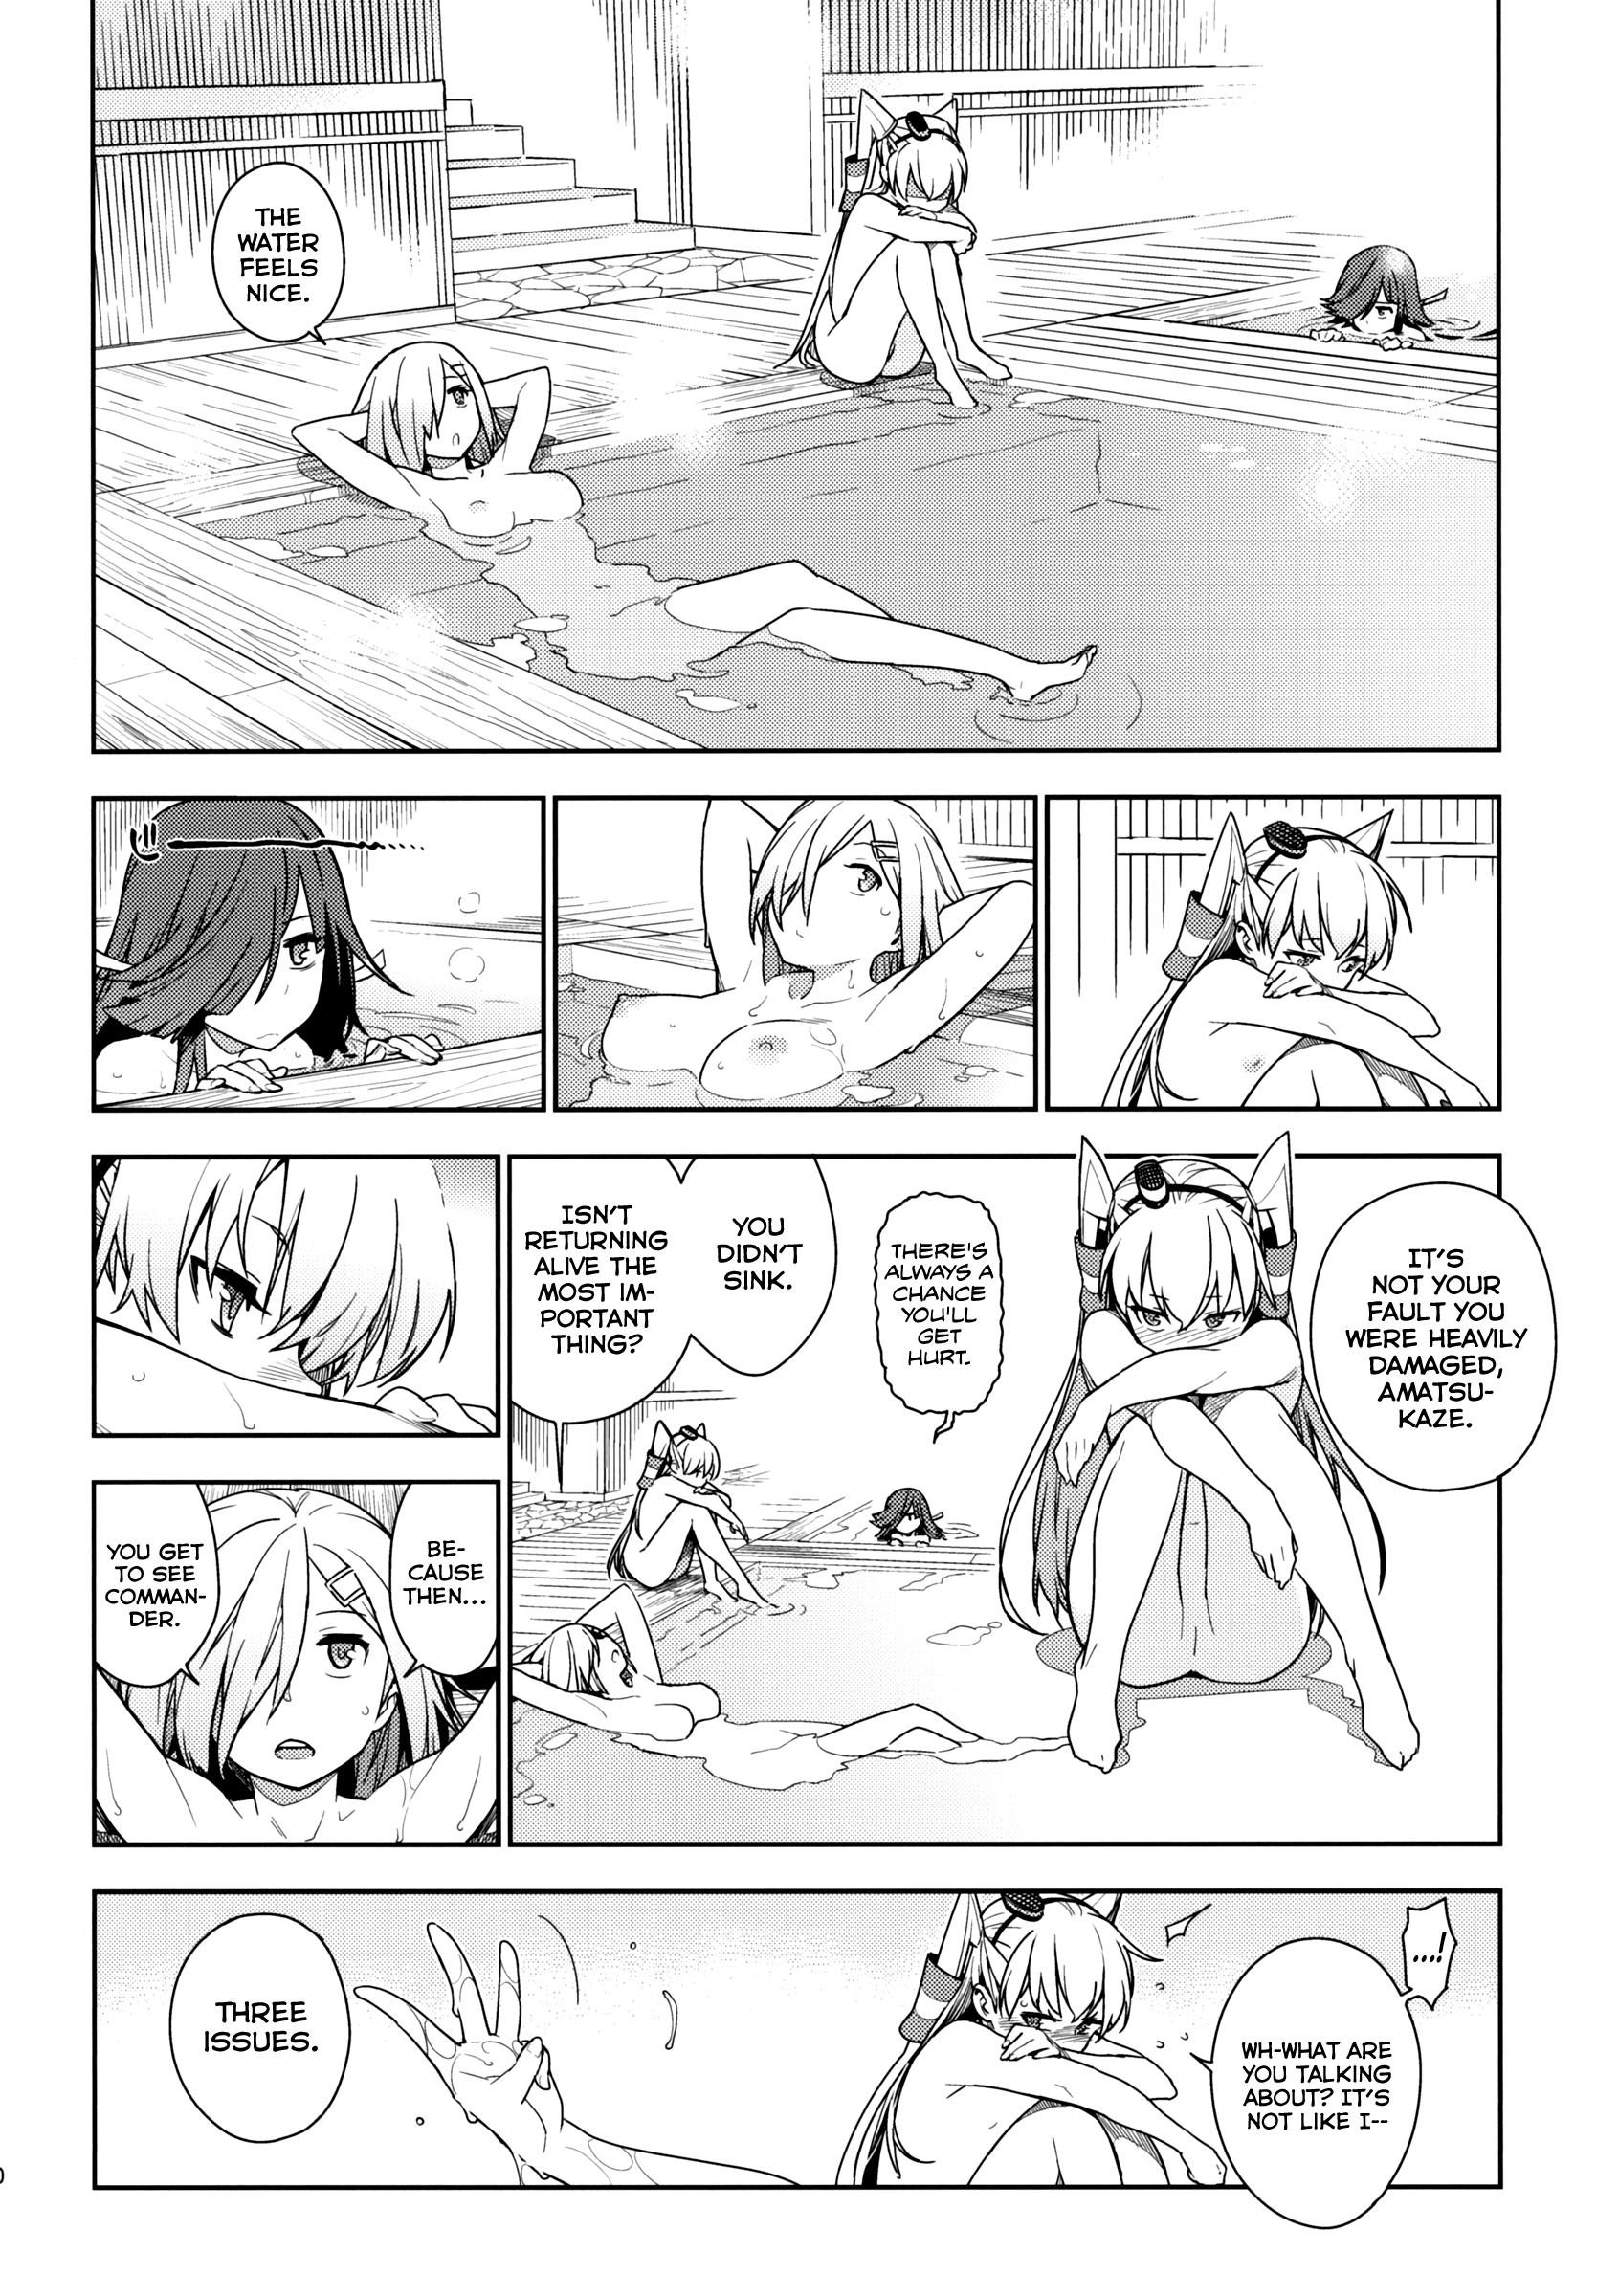 Daring Little by little - Kantai collection Hidden Cam - Page 9